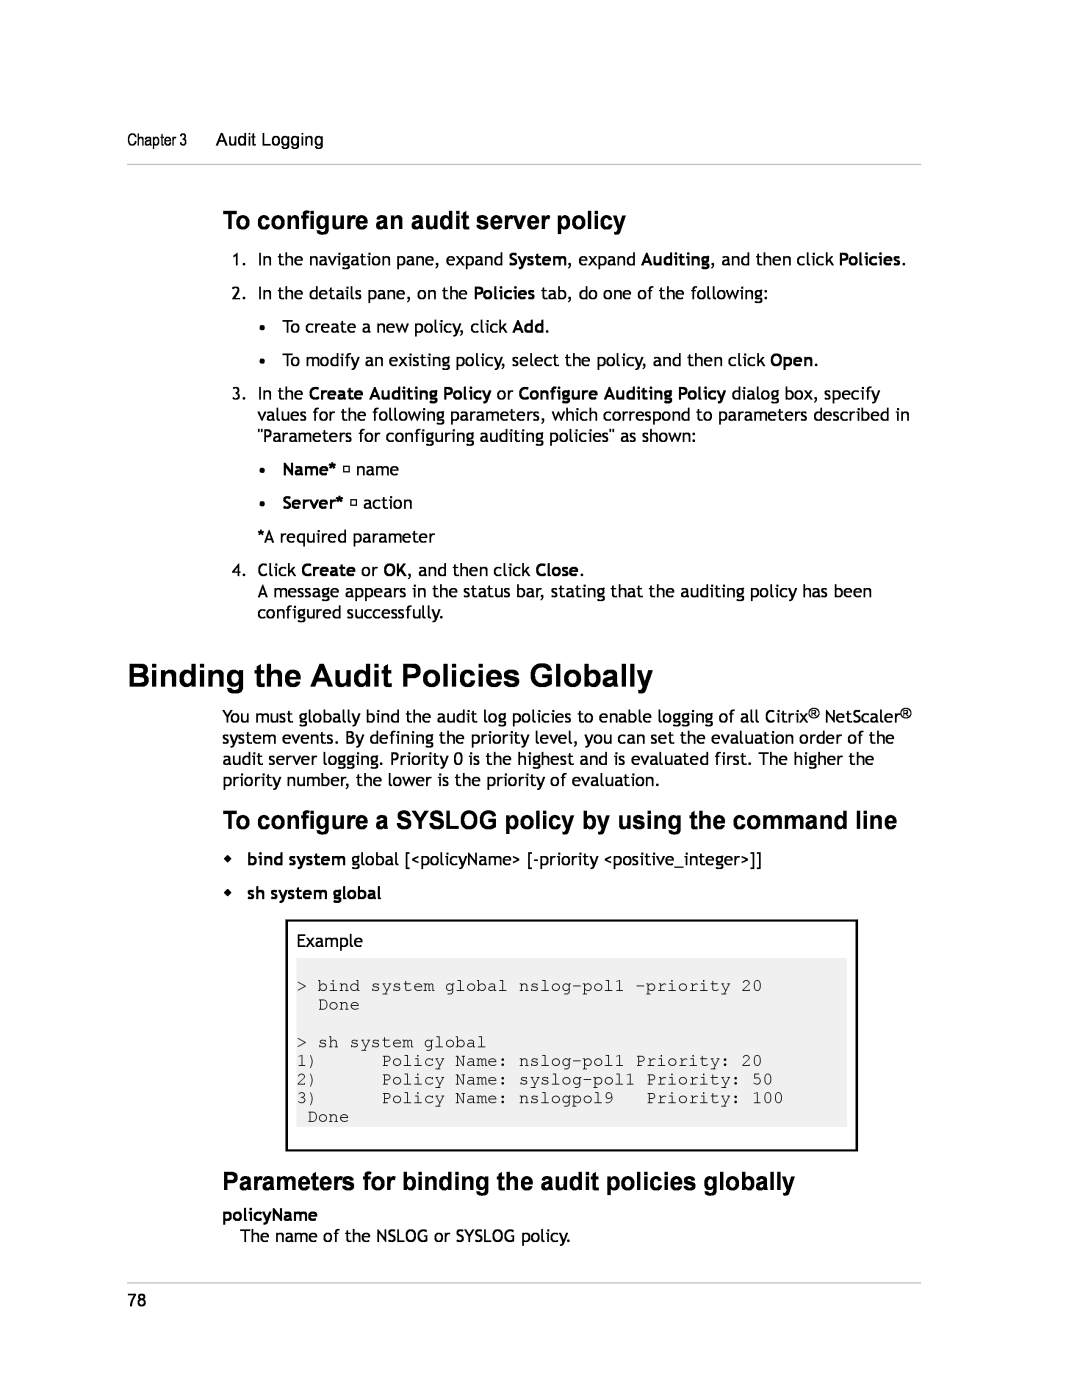 Citrix Systems CITRIX NETSCALER 9.3 Binding the Audit Policies Globally, To configure an audit server policy, policyName 